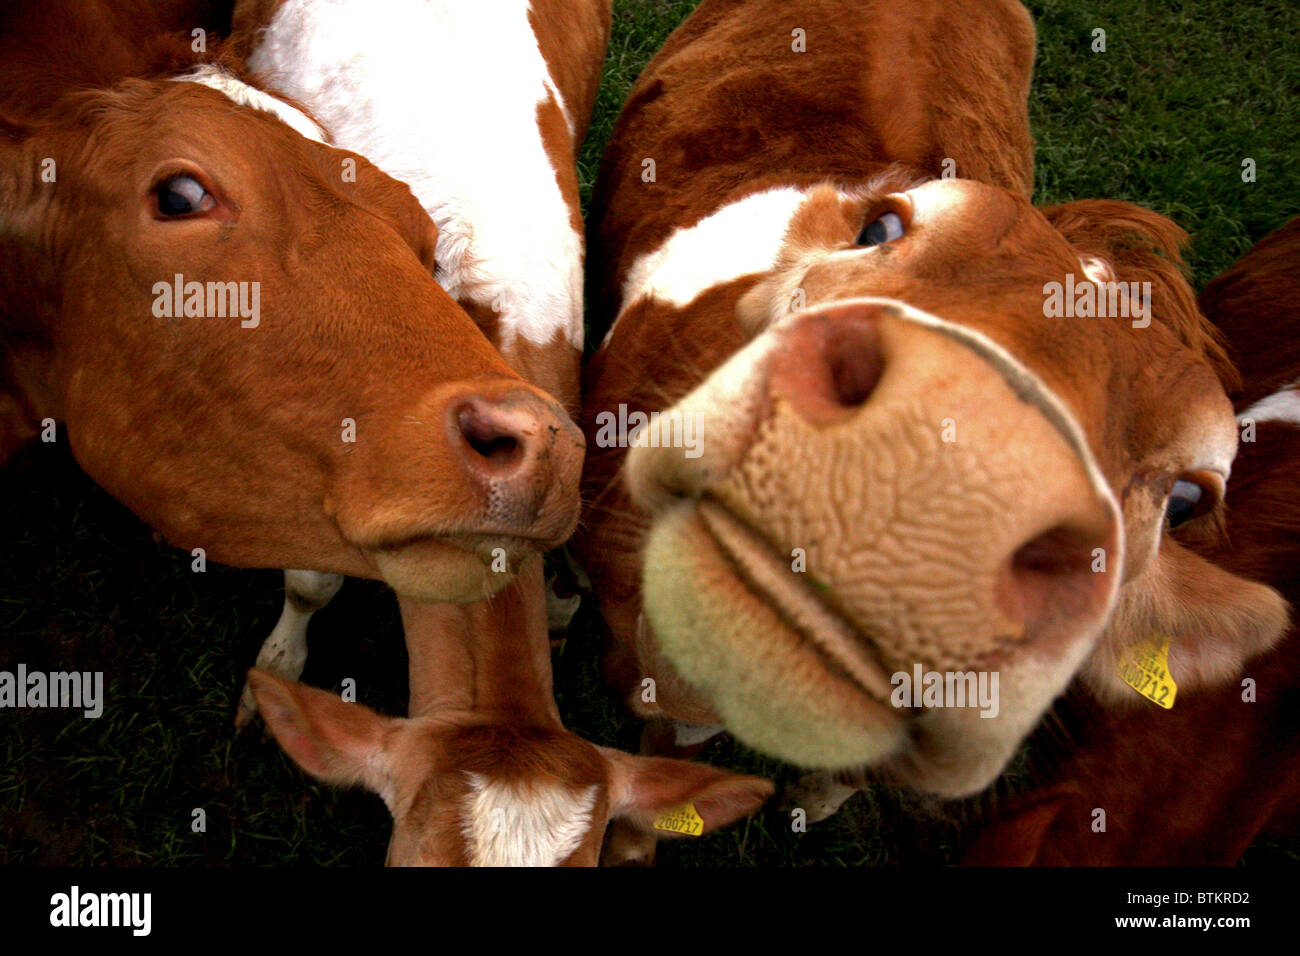 The Guernsey Cow Stock Photo